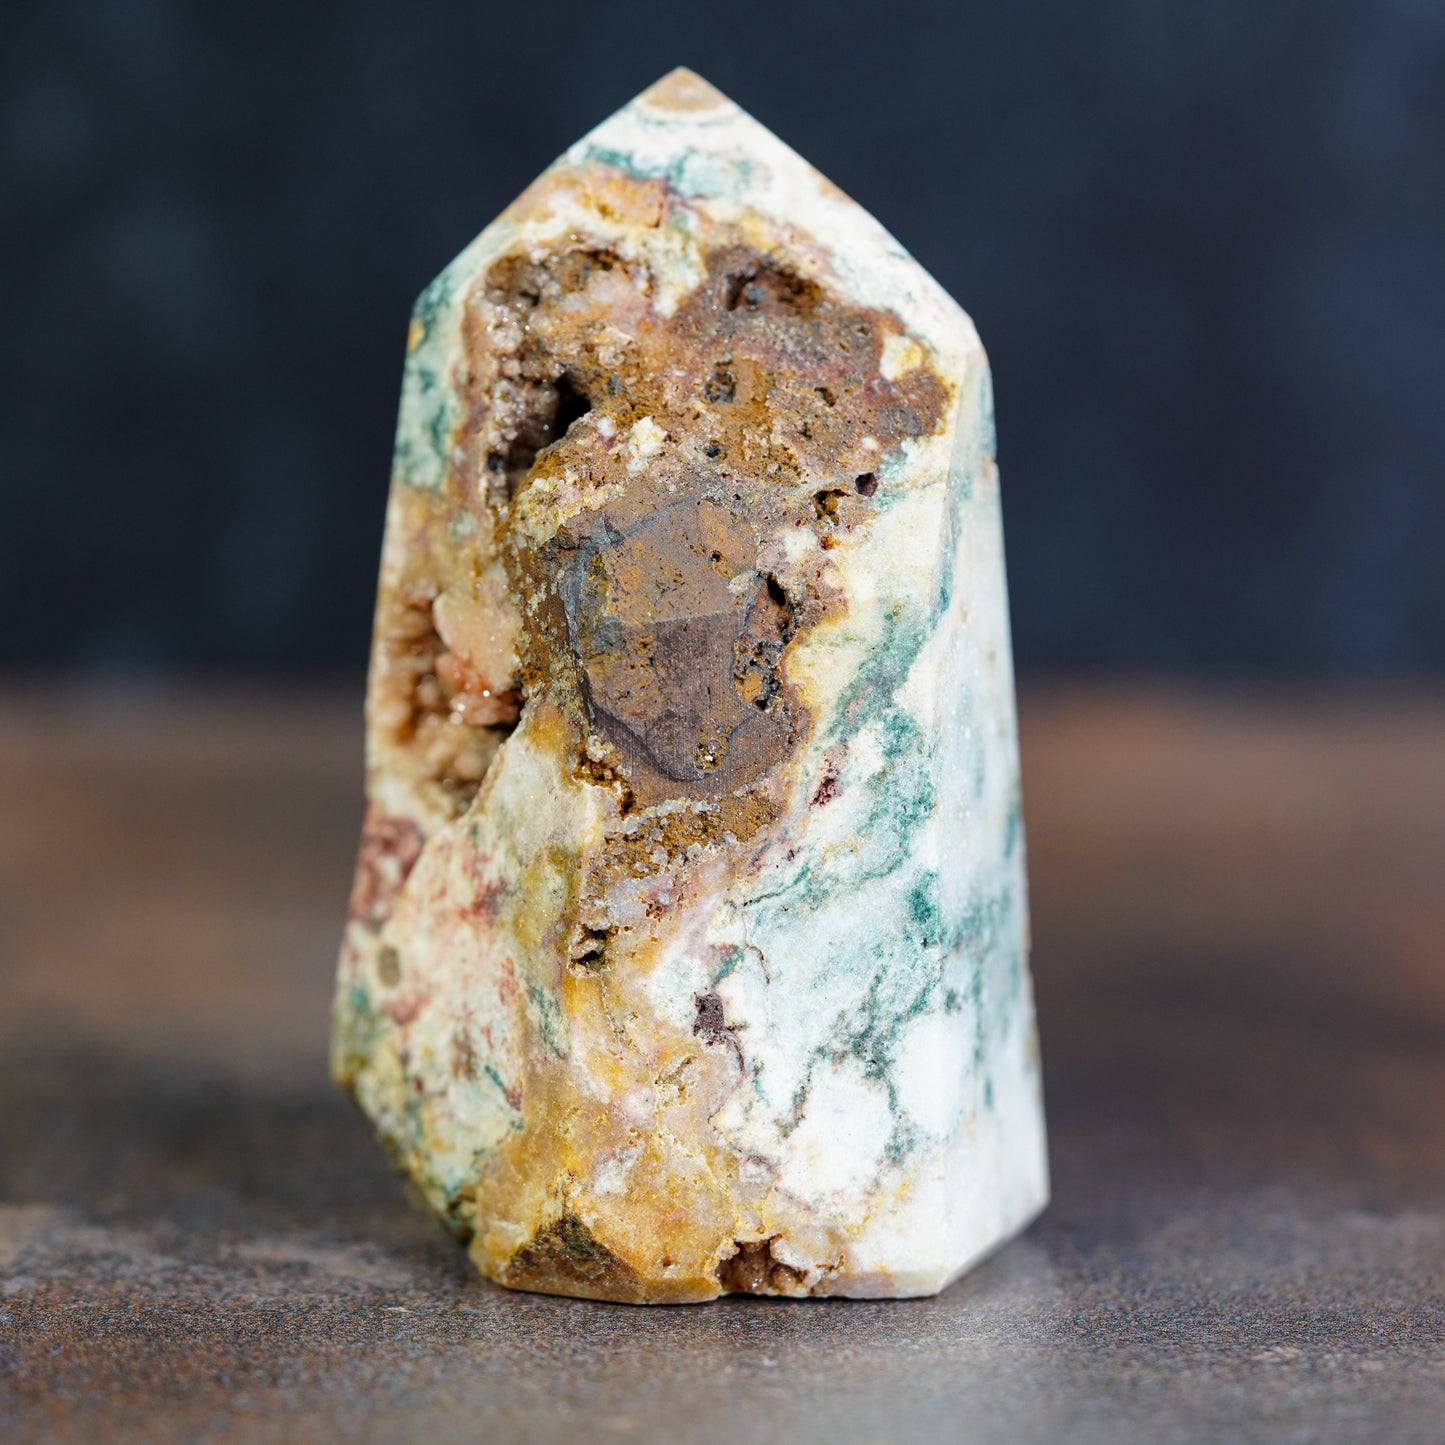 Jasper and Calcite Mineral Tower with Botryoidal Druzy